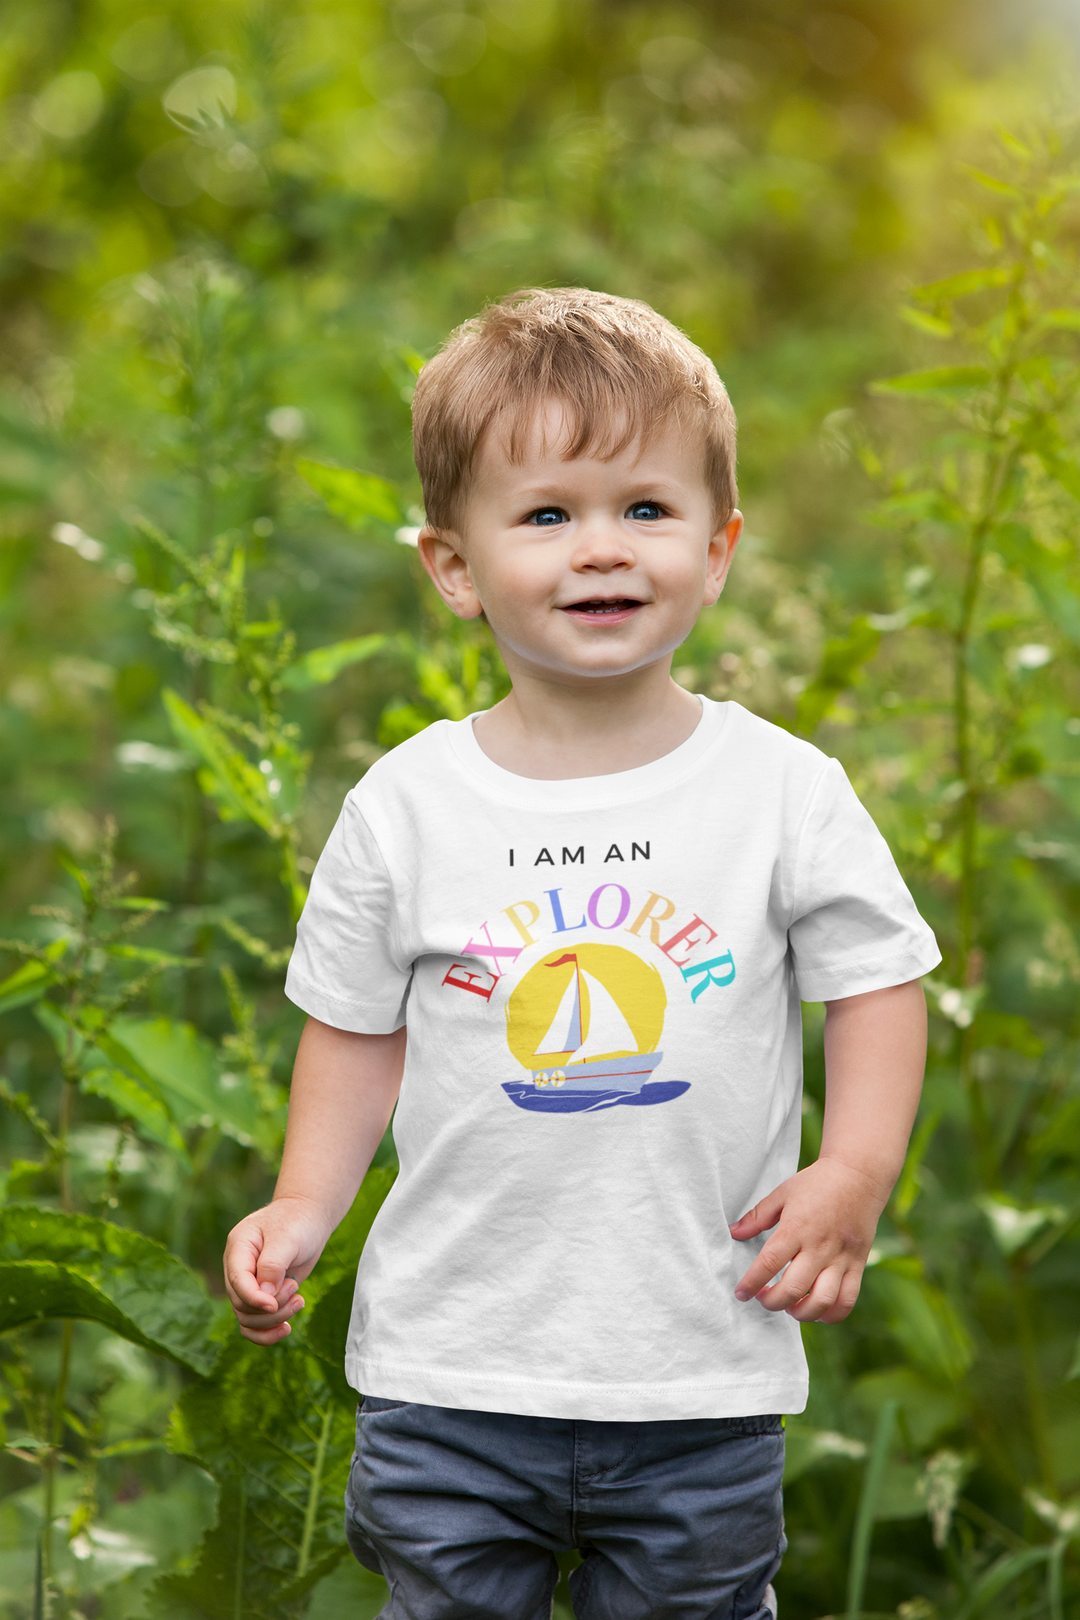 I am an explorer, with sailboat. Short sleeve t shirt for toddler and kids. - TeesForToddlersandKids -  t-shirt - positive - i-am-an-explorer-with-sailboat-short-sleeve-t-shirt-for-toddler-and-kids